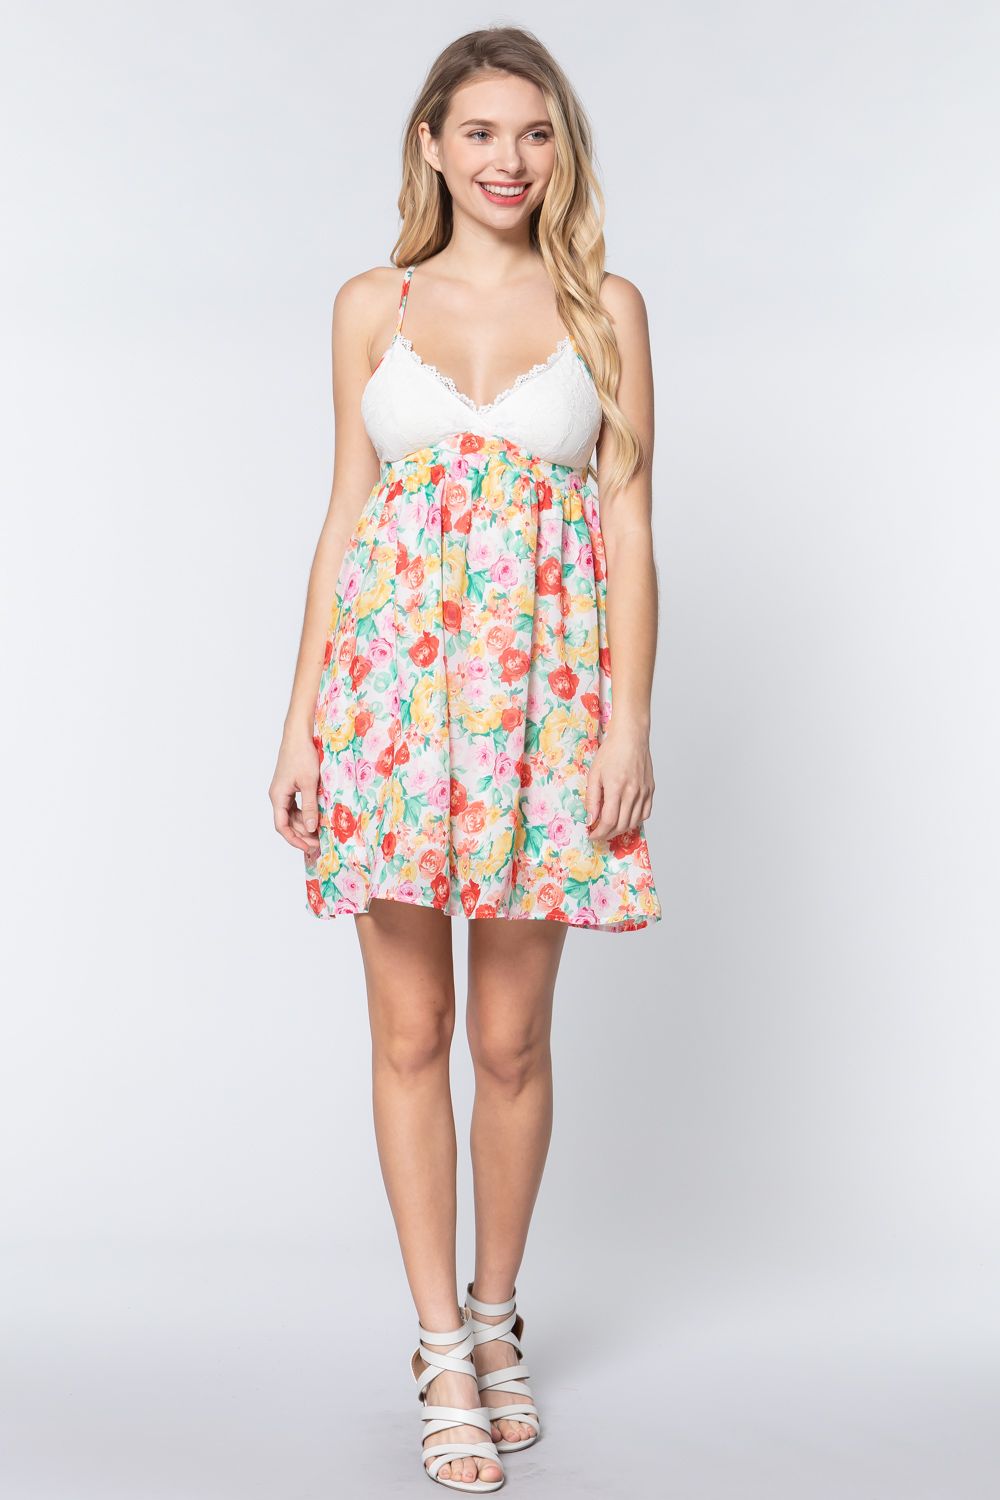 V-neck Open Back Floral Mini Dress - Shopping Therapy